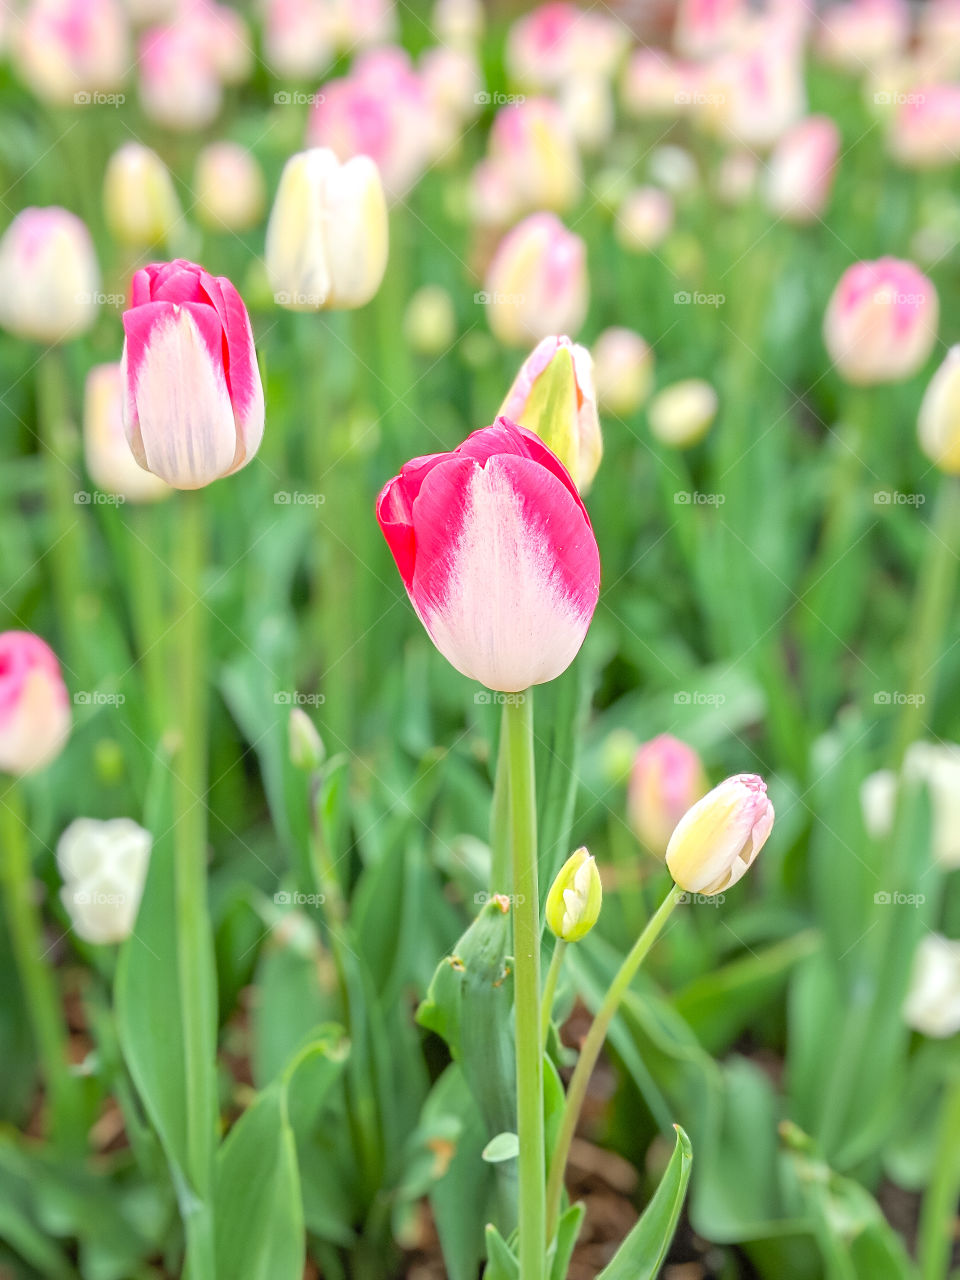 Vibrant, Bright, and Colorful Pink Tulips